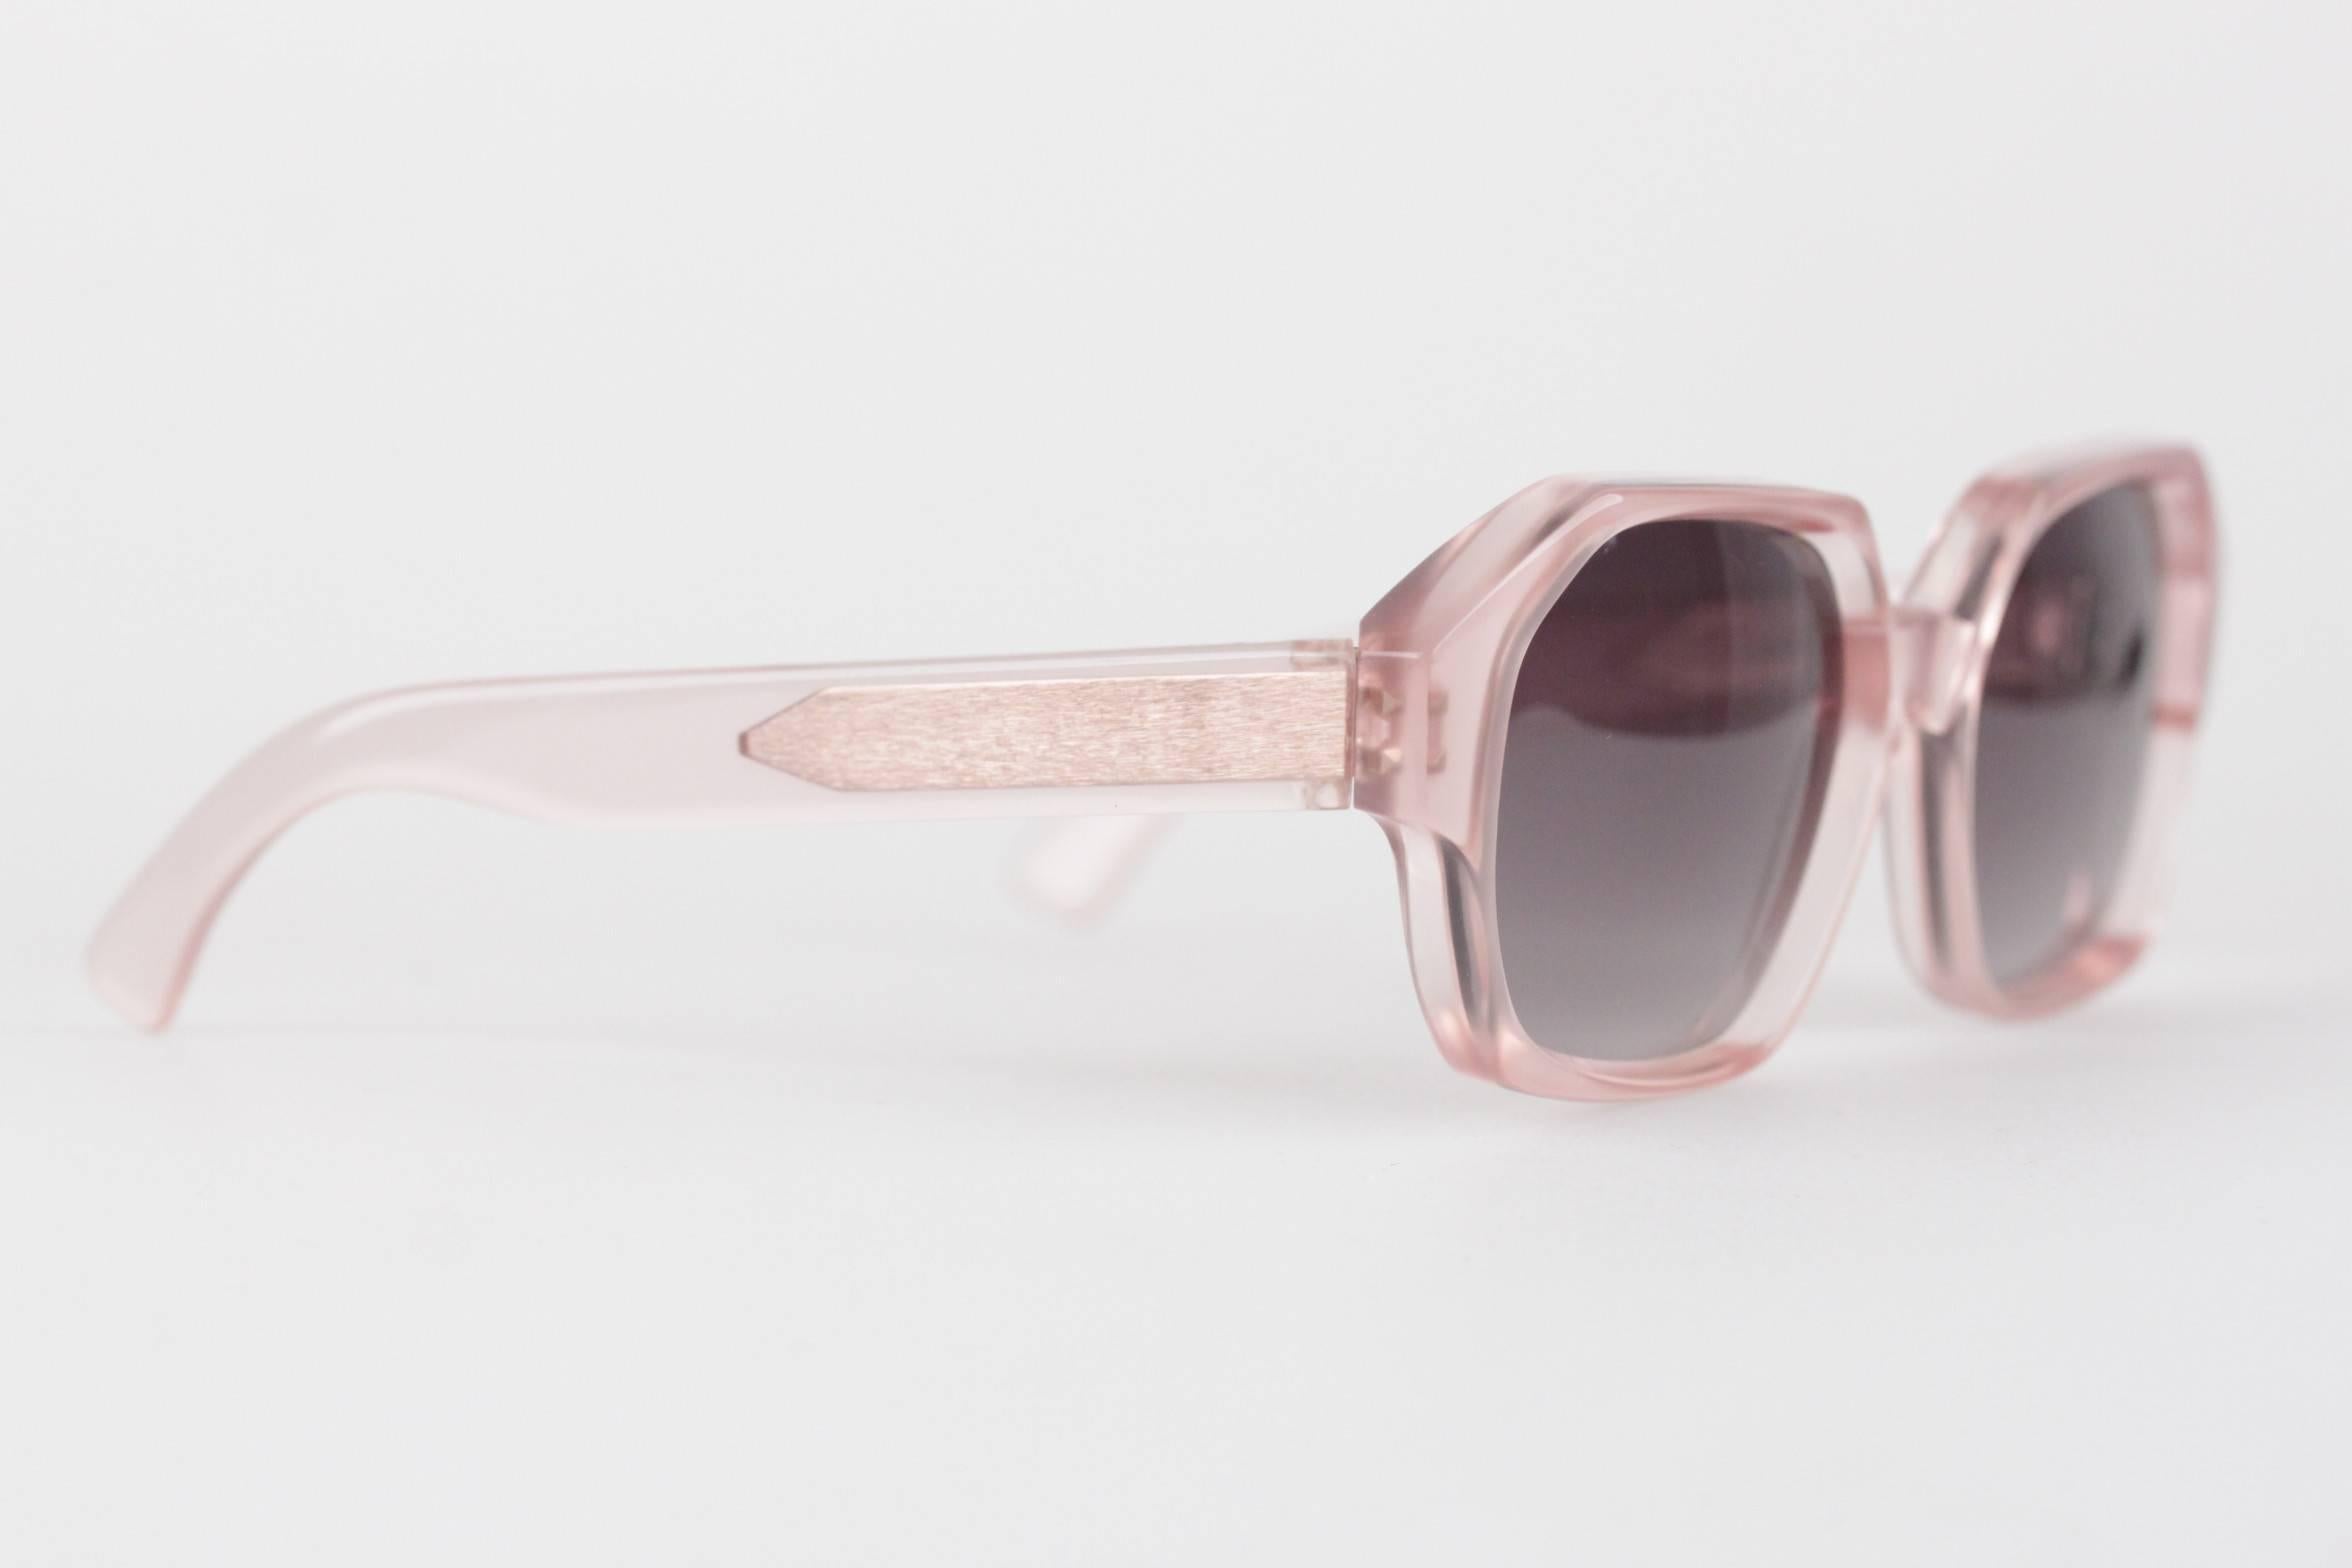 YSL, Handmade in France

Pink squared frame, with BLUE/GRAY GRADIENT MINT 100% UV protetion LENSES

Mod. APATURA - 48/18

Condition:  A+ :MINT CONDITION! Mint item. Never worn or used

Approximate measurements in mm's:

- TEMPLE LENGTH: